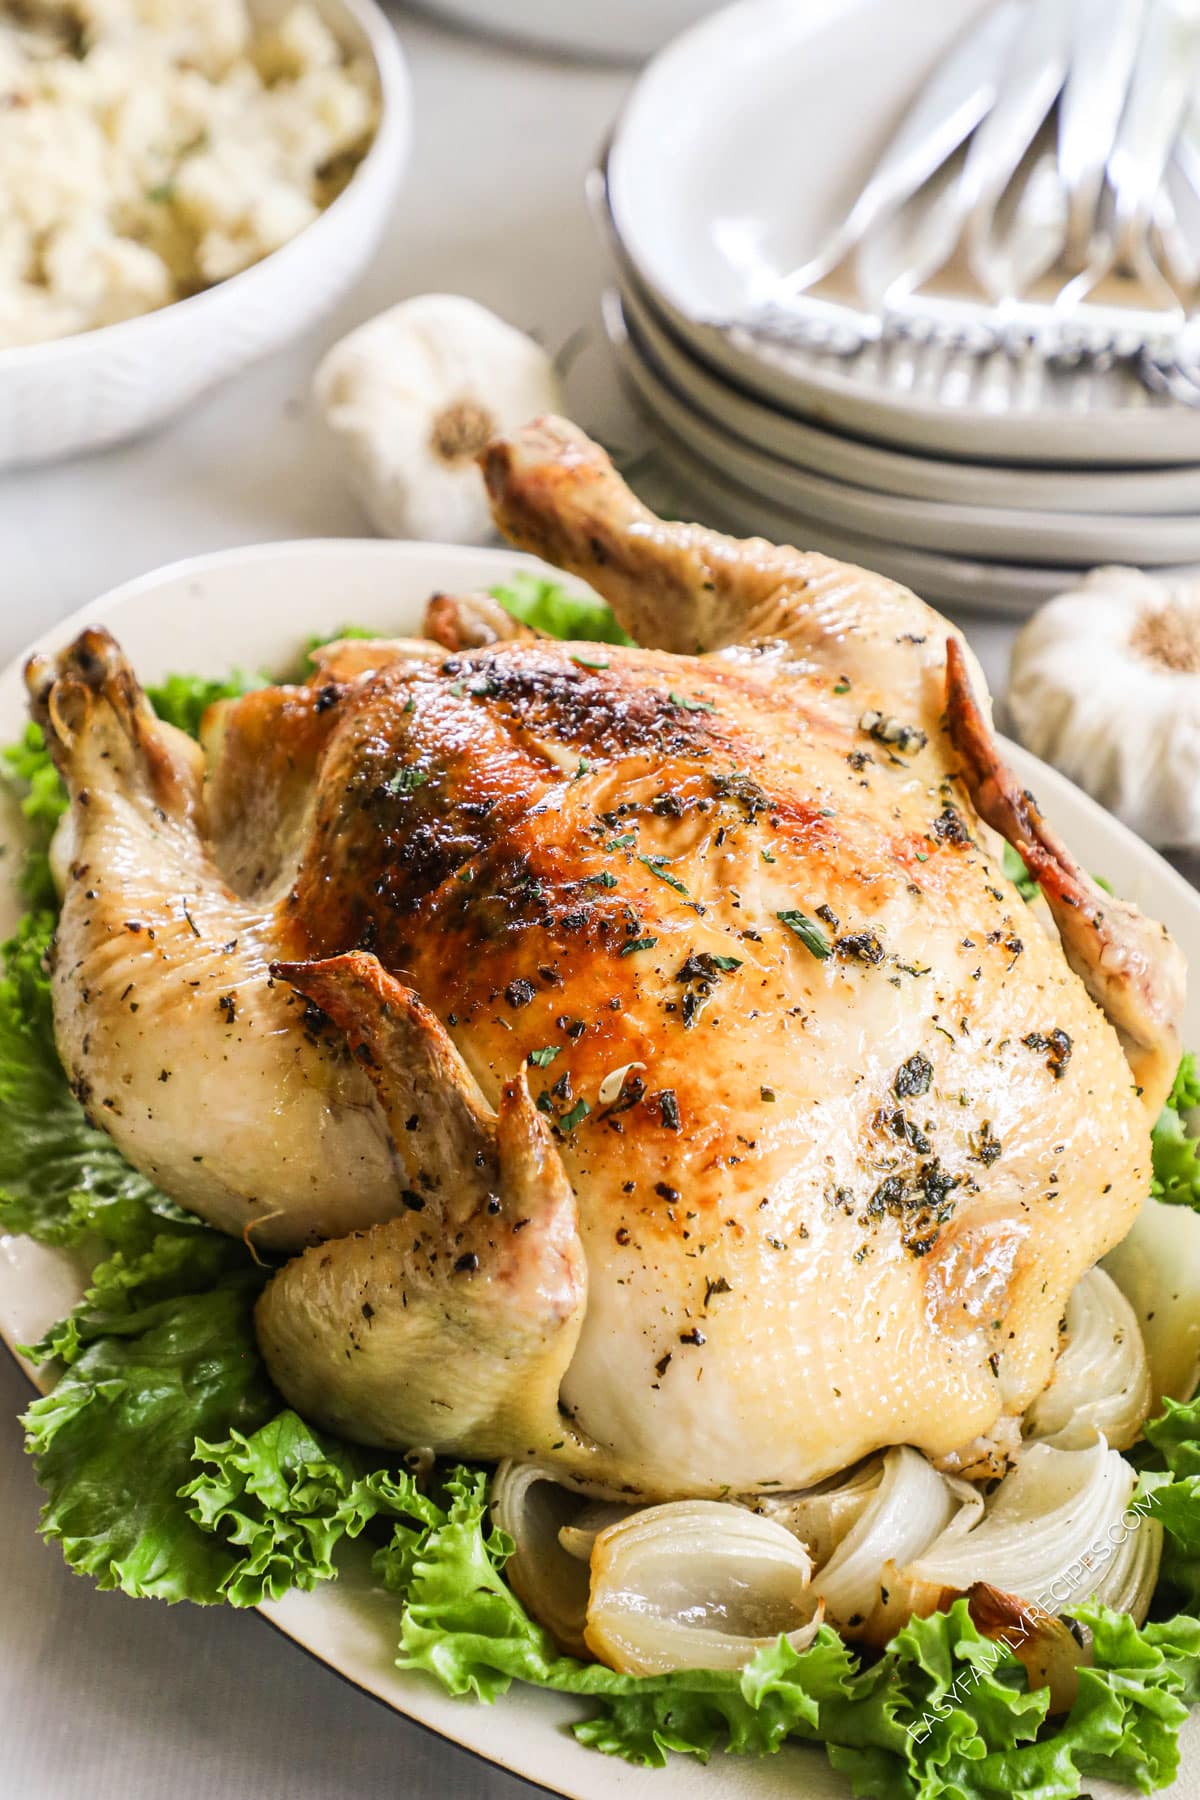 Whole Dutch oven roast chicken on platter with onions and lettuce